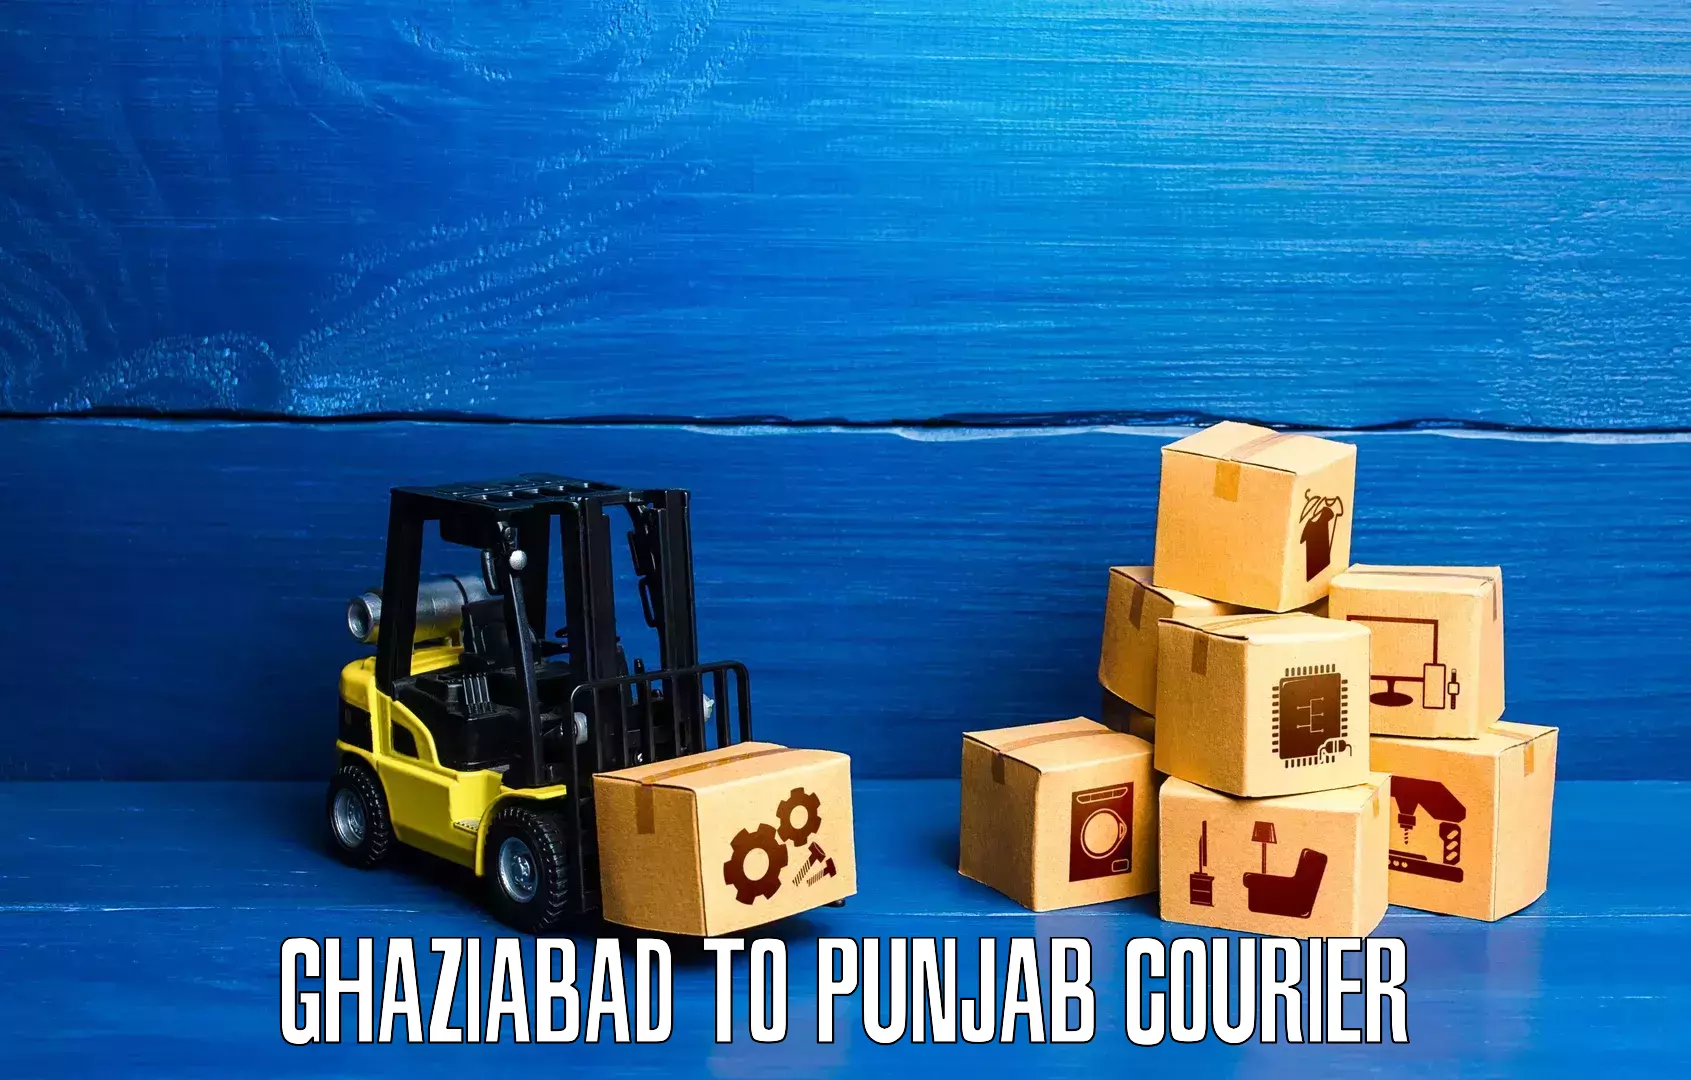 User-friendly delivery service Ghaziabad to Punjab